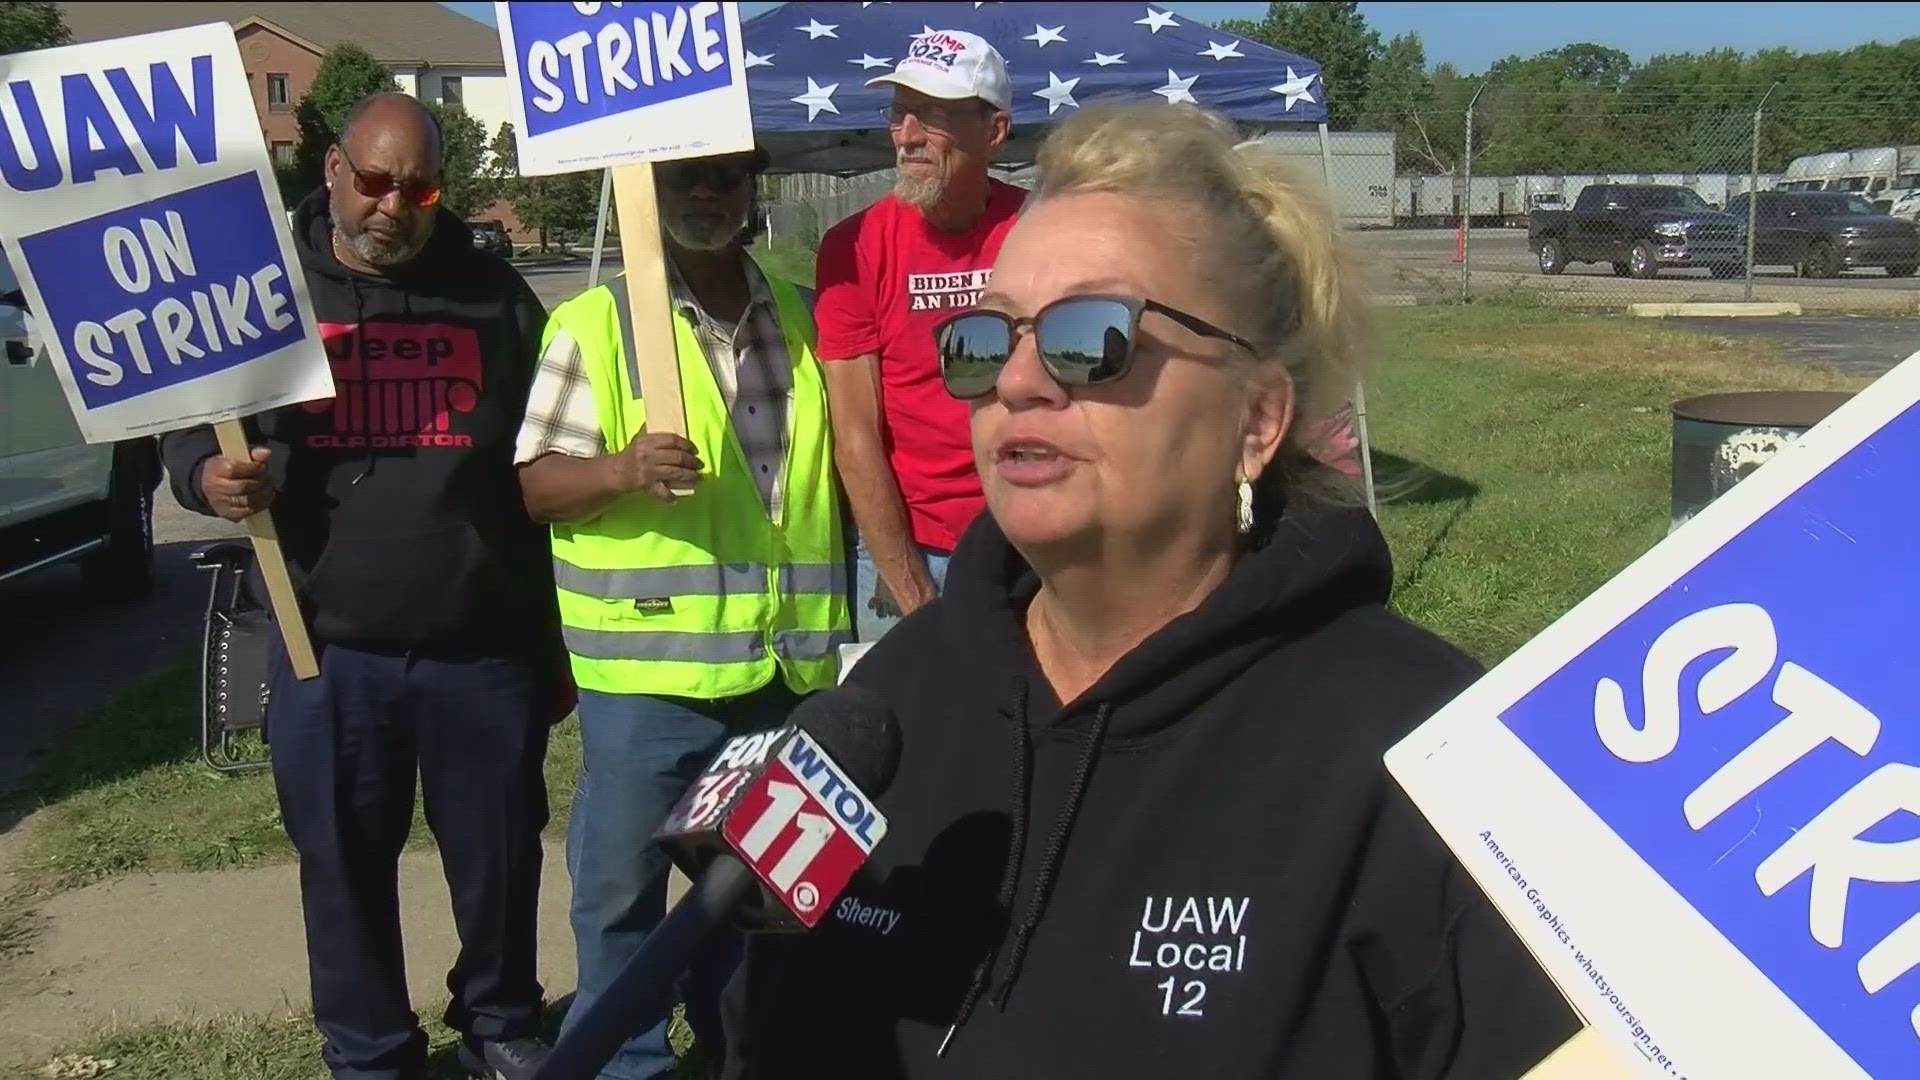 UAW workers say they are striking for the contract they deserve.